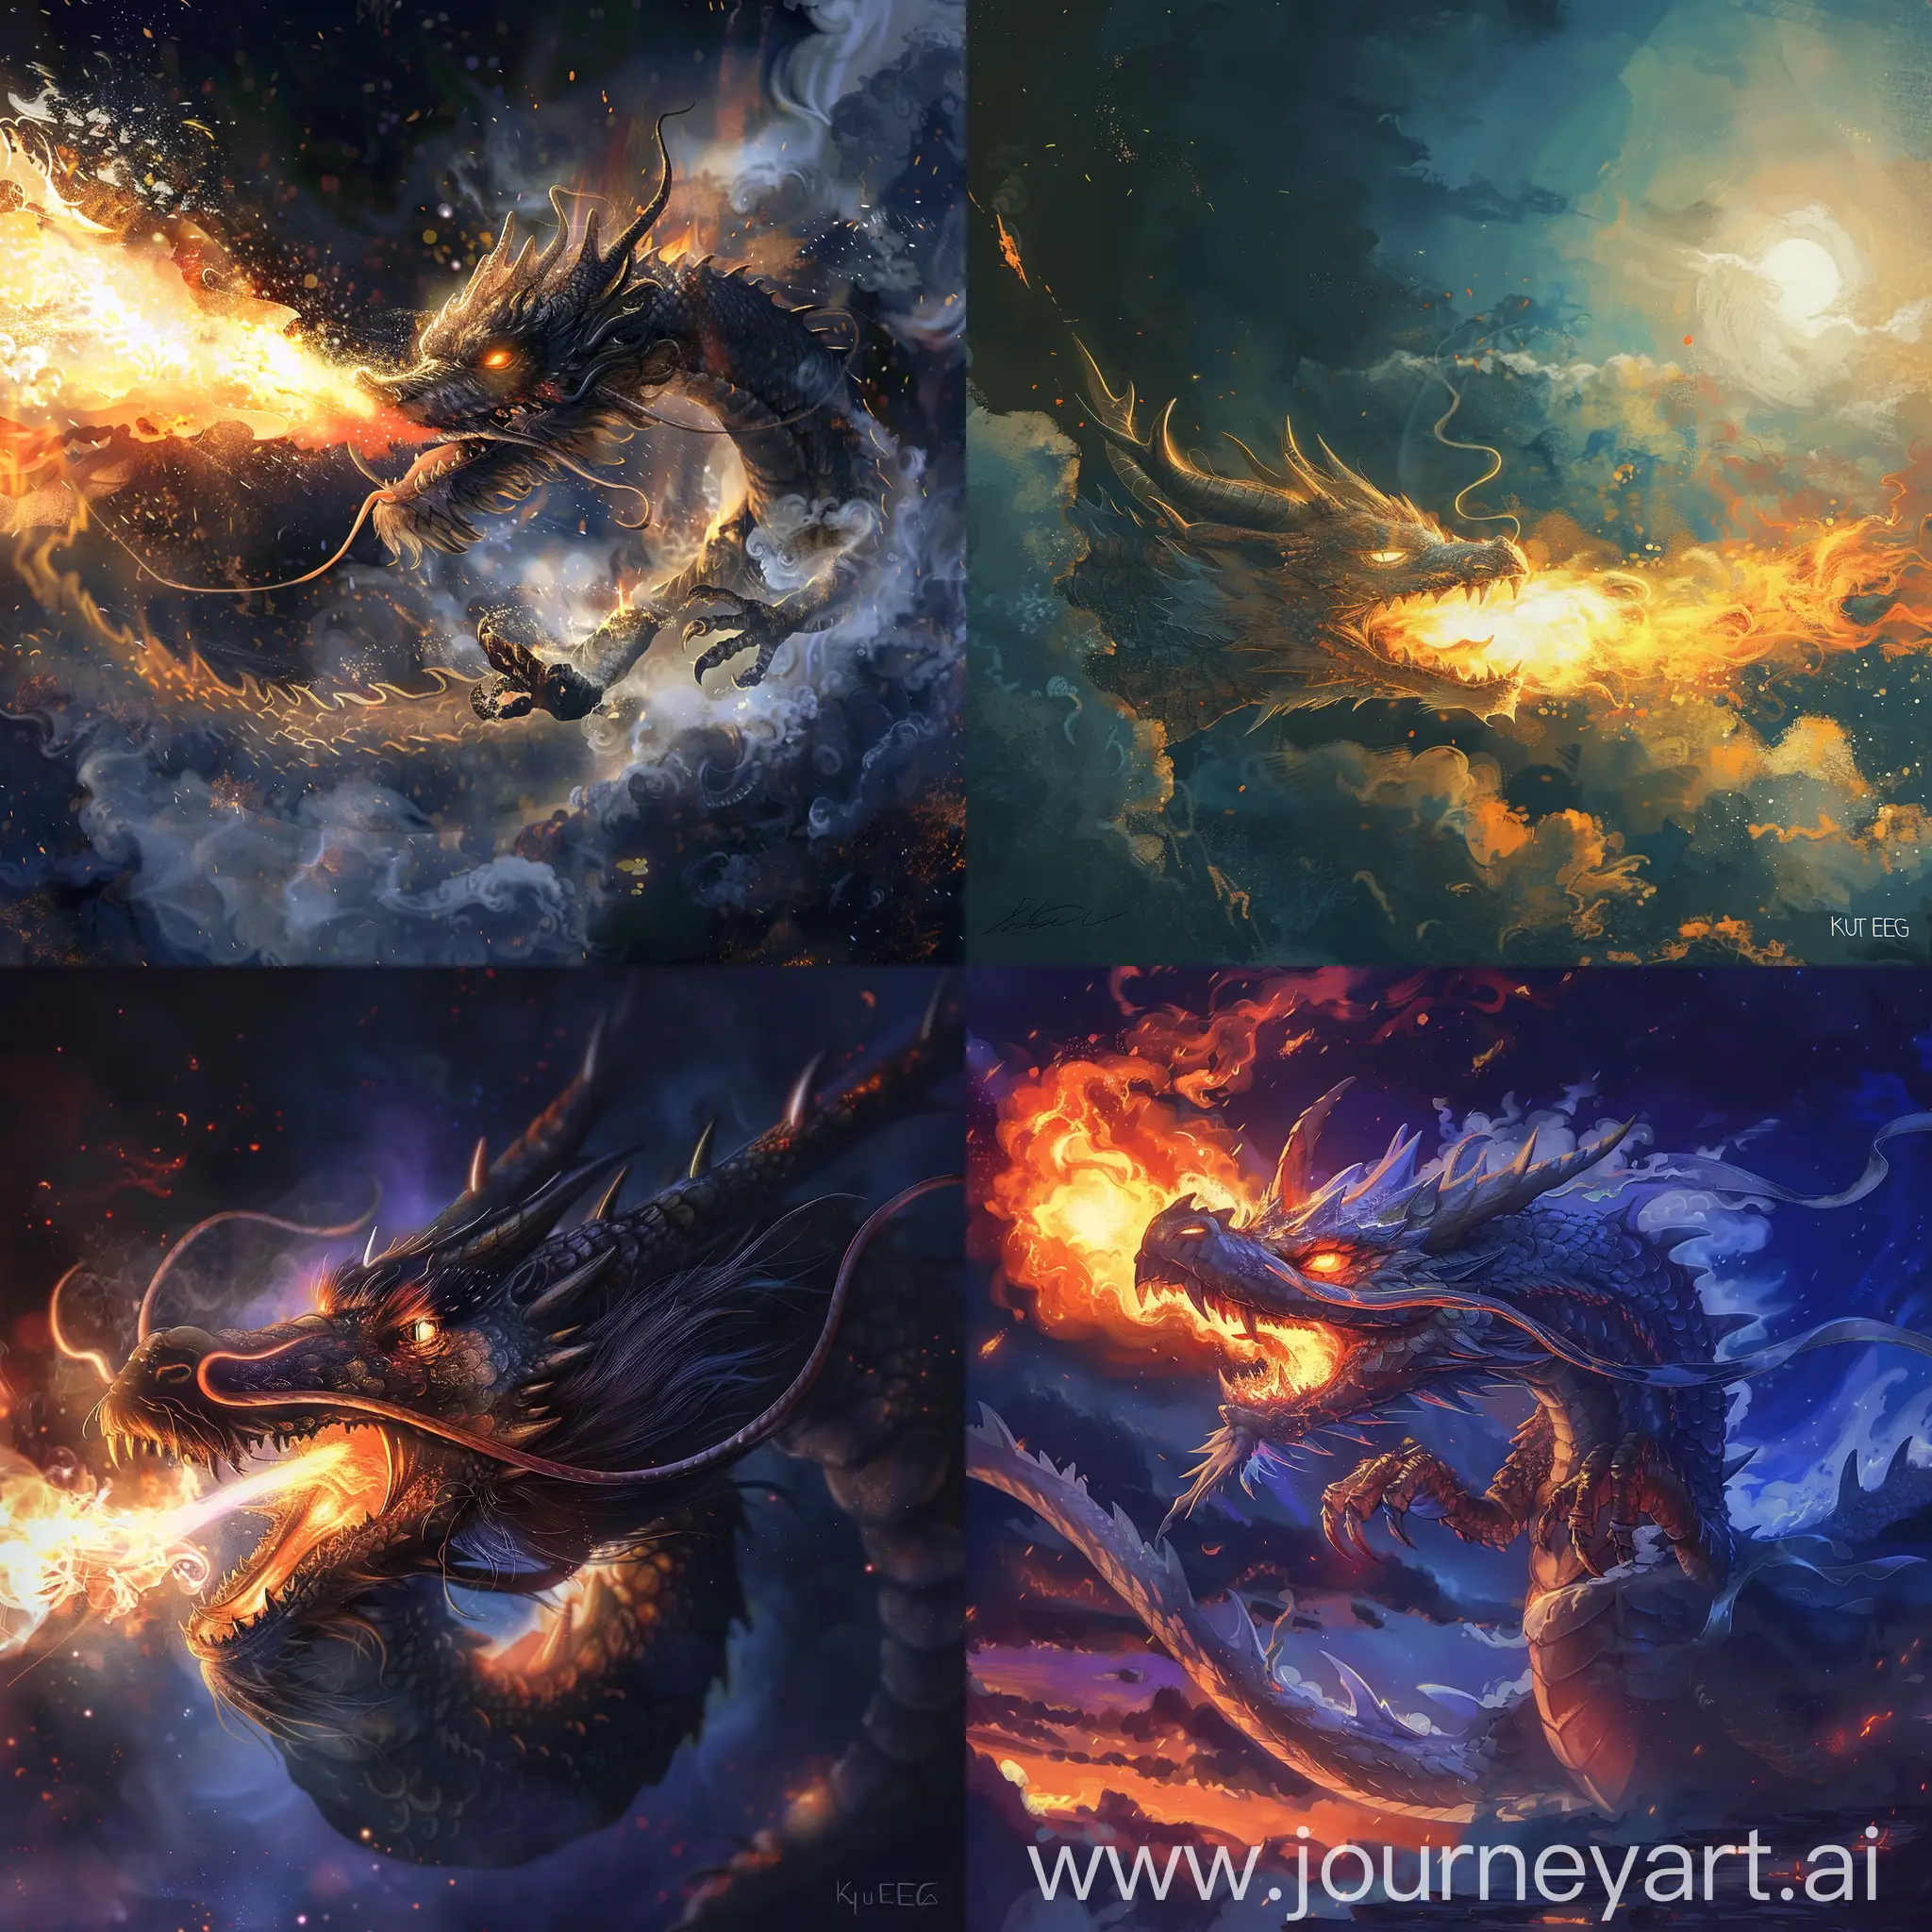 Anime style illustration of a dragon, blowing fire, midnight, fire element, art, epic, illustration by Kyutae Lee